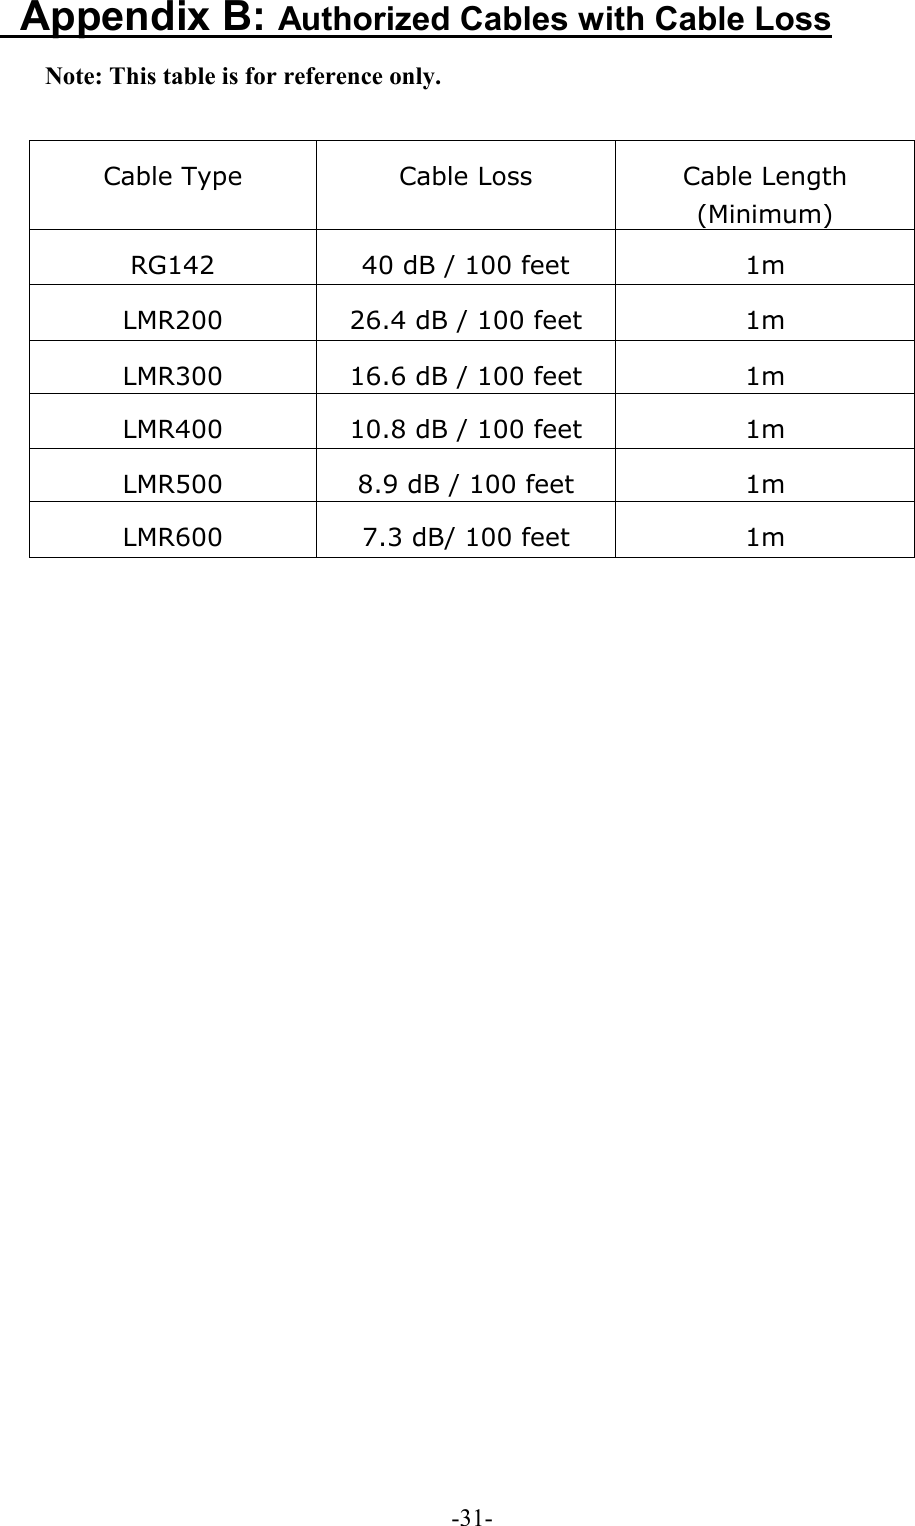  -31- Appendix B: Authorized Cables with Cable Loss Note: This table is for reference only.  Cable Type  Cable Loss    Cable Length (Minimum) RG142  40 dB / 100 feet  1m LMR200  26.4 dB / 100 feet  1m LMR300  16.6 dB / 100 feet  1m LMR400  10.8 dB / 100 feet  1m LMR500  8.9 dB / 100 feet  1m LMR600  7.3 dB/ 100 feet  1m 